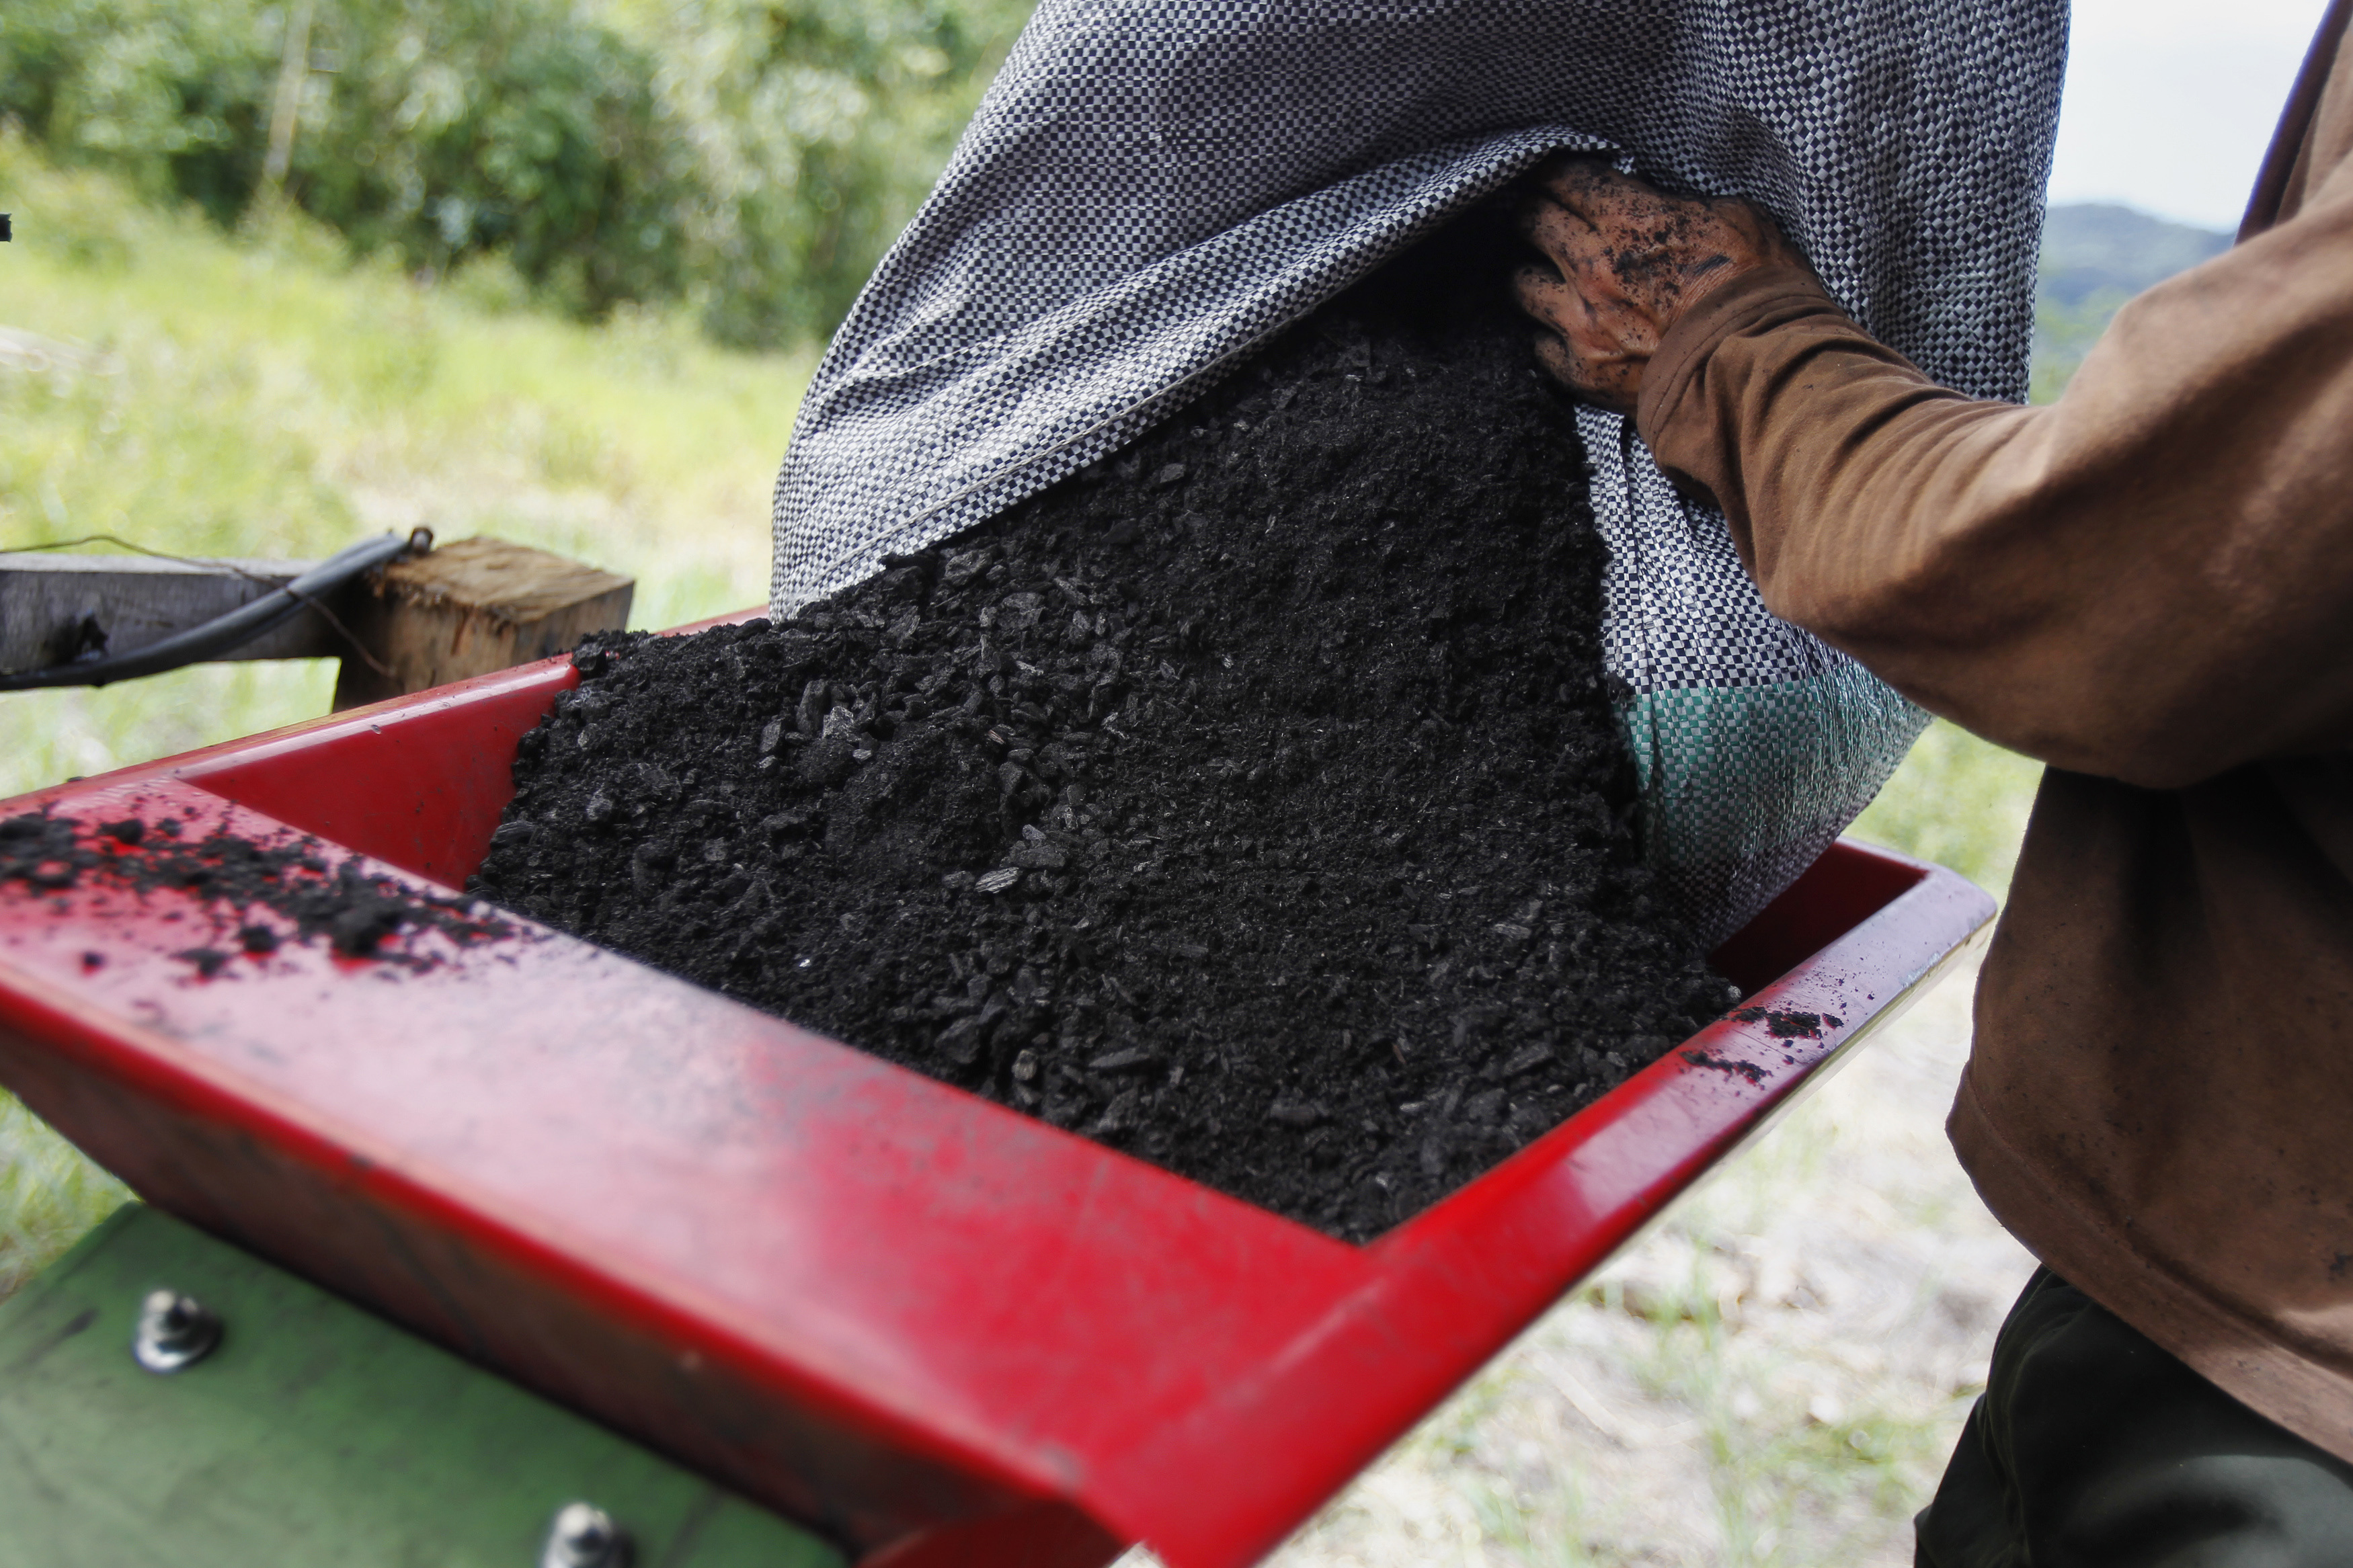 A worker prepares to grind biochar extracted from an oven at the Villa Carmen Biological Station in Pilcopata